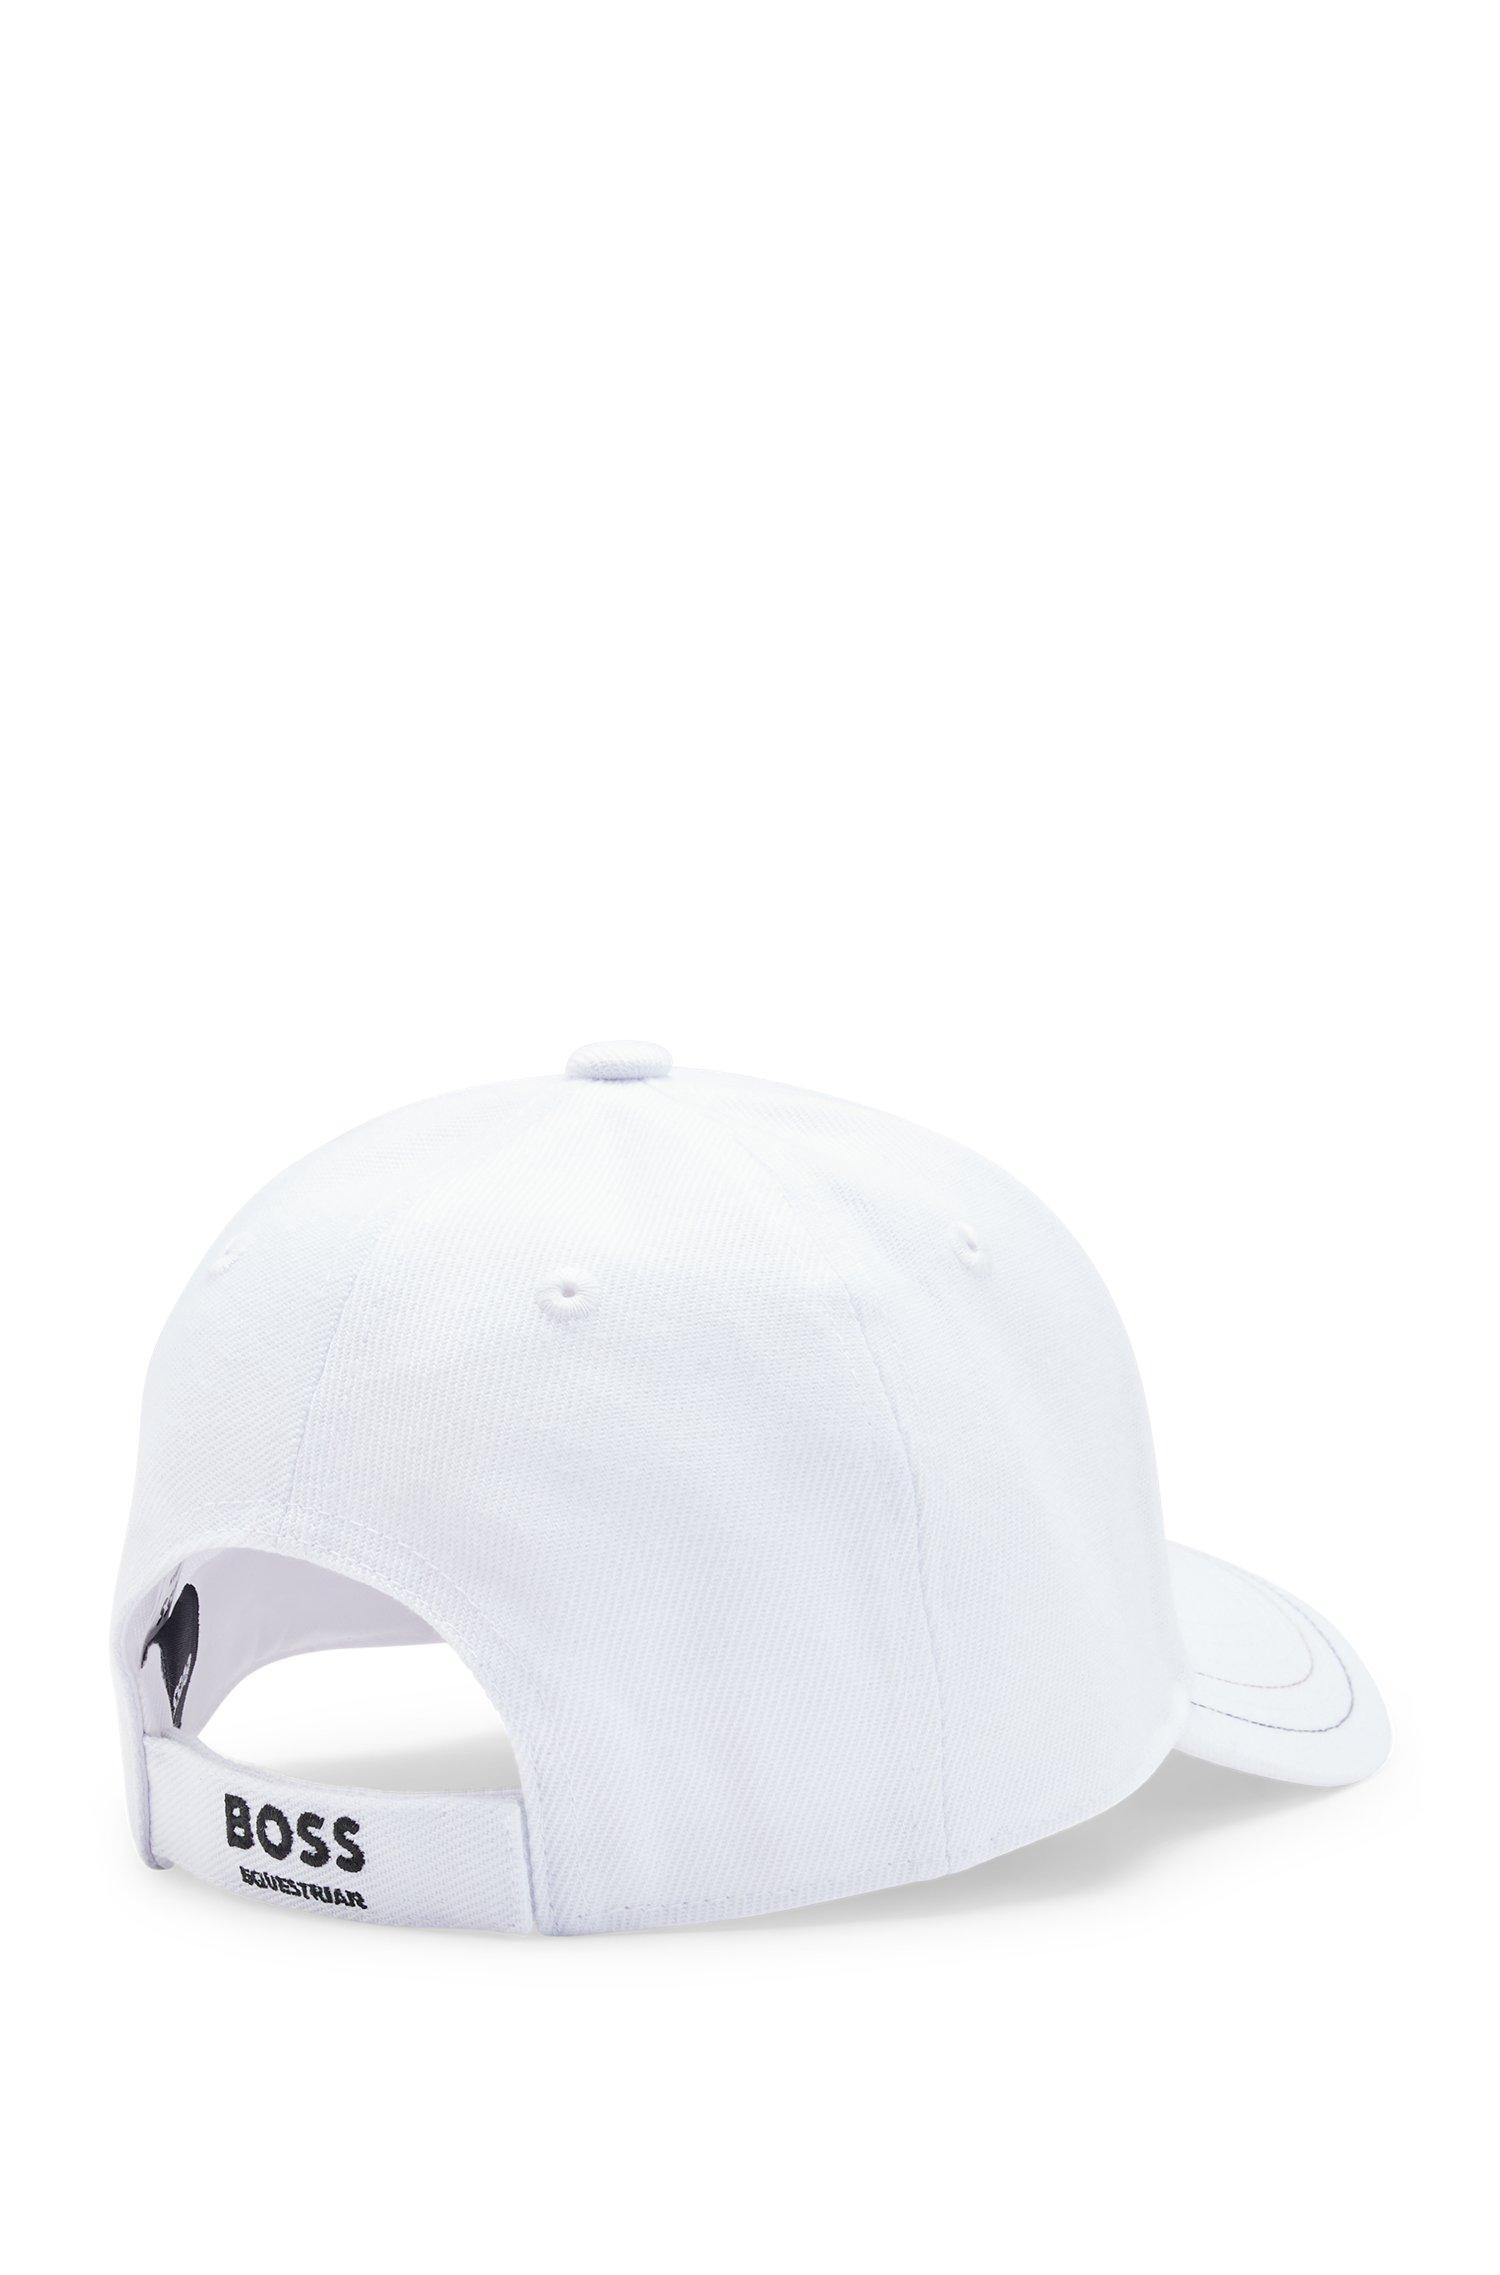 BOSS Logo Five-panel Details in | BOSS Lyst UK Equestrian HUGO by White Cap With